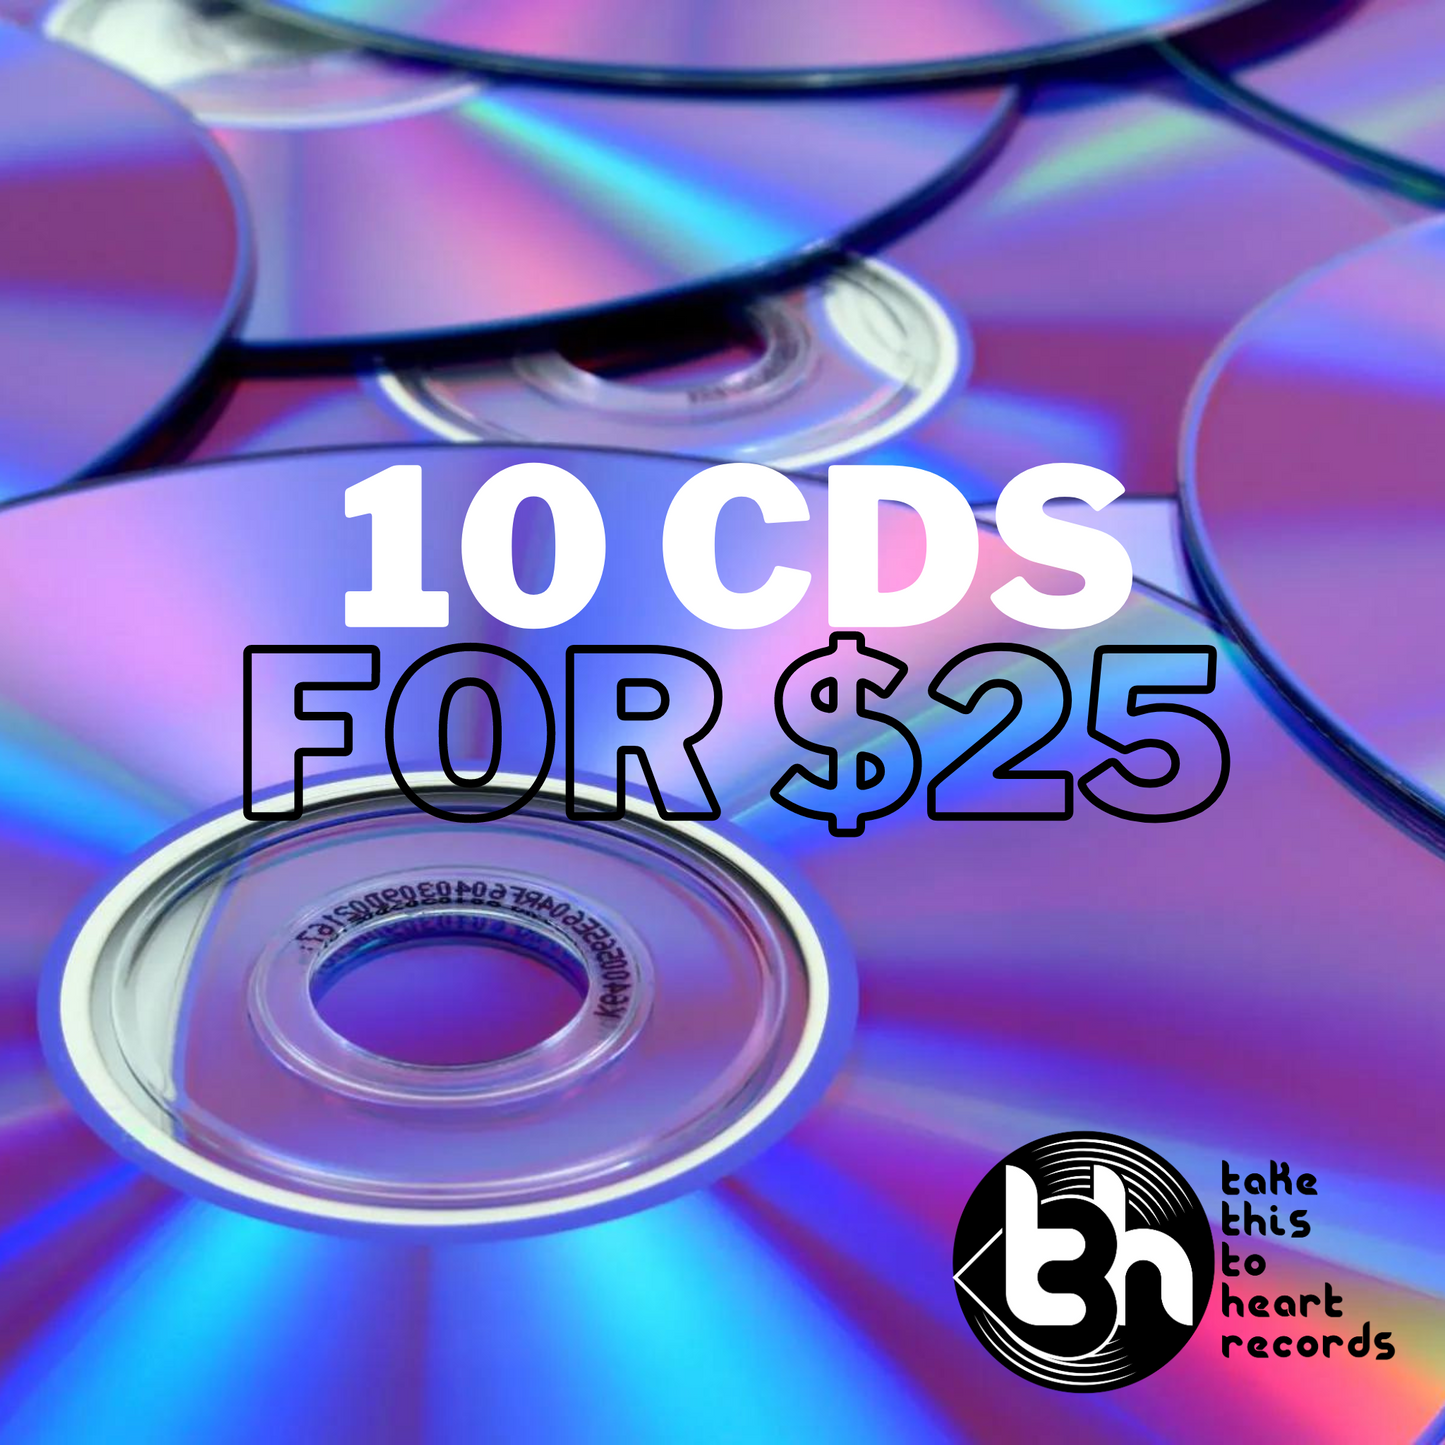 10 CDs for $25